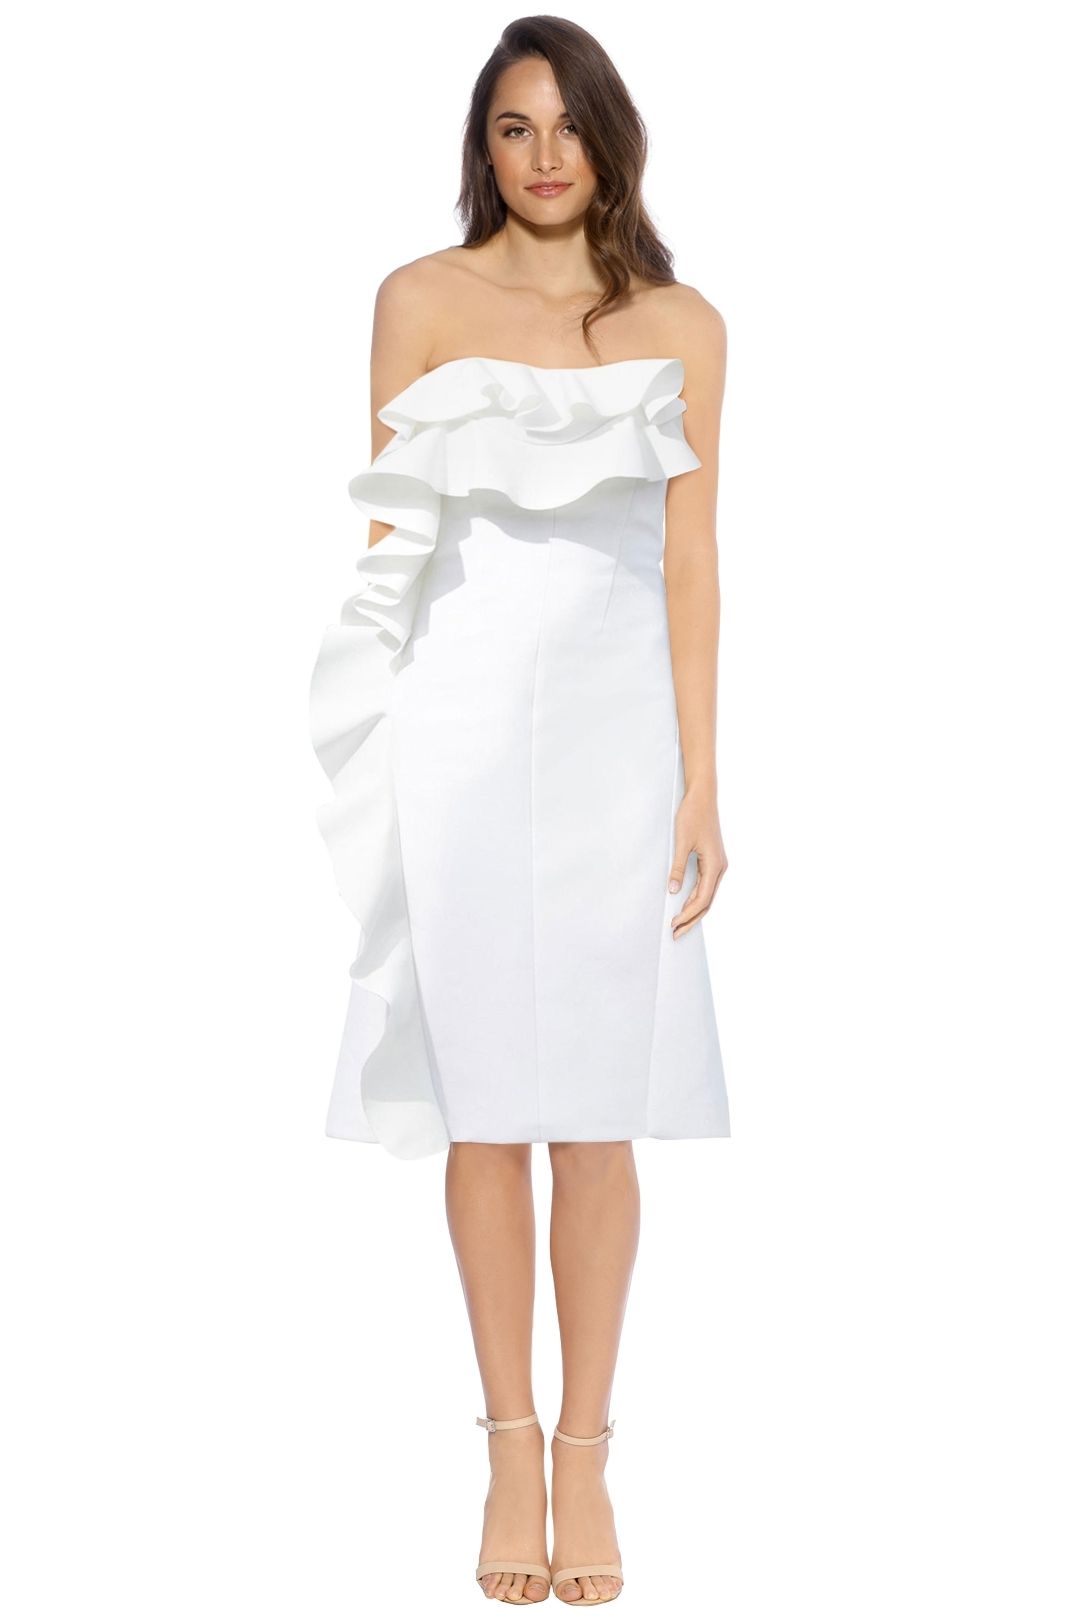 By Johnny - Tess Angel Strapless Dress - White - Front